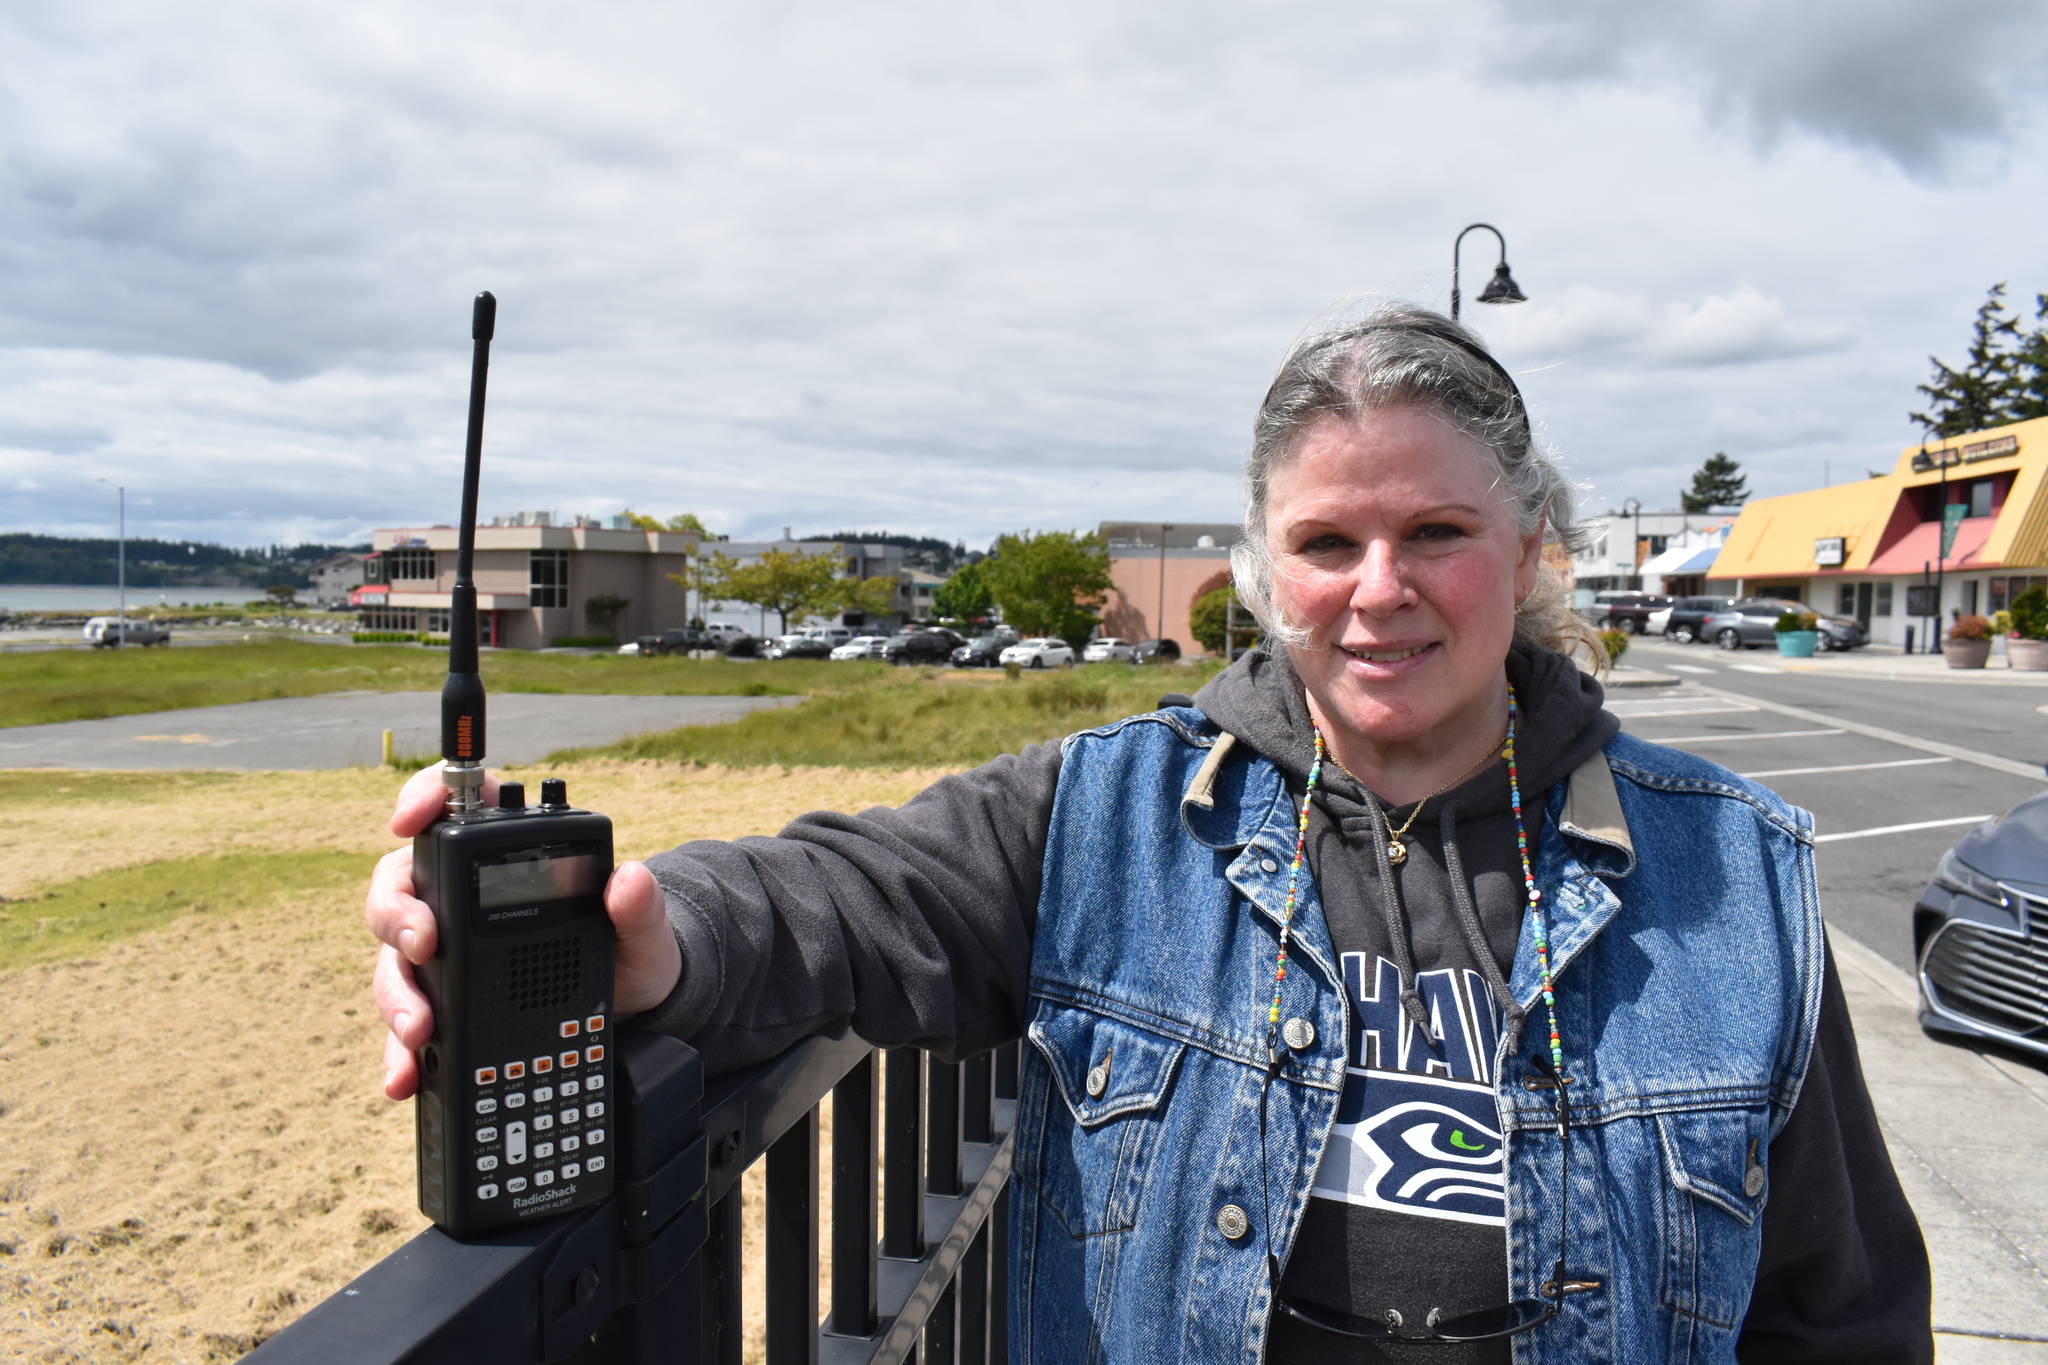 Photo by Emily Gilbert/Whidbey News-Times
Kathy Hawn has had a police scanner for most of her life. She’s gained a following on Facebook for posting what she hears called over the radio.